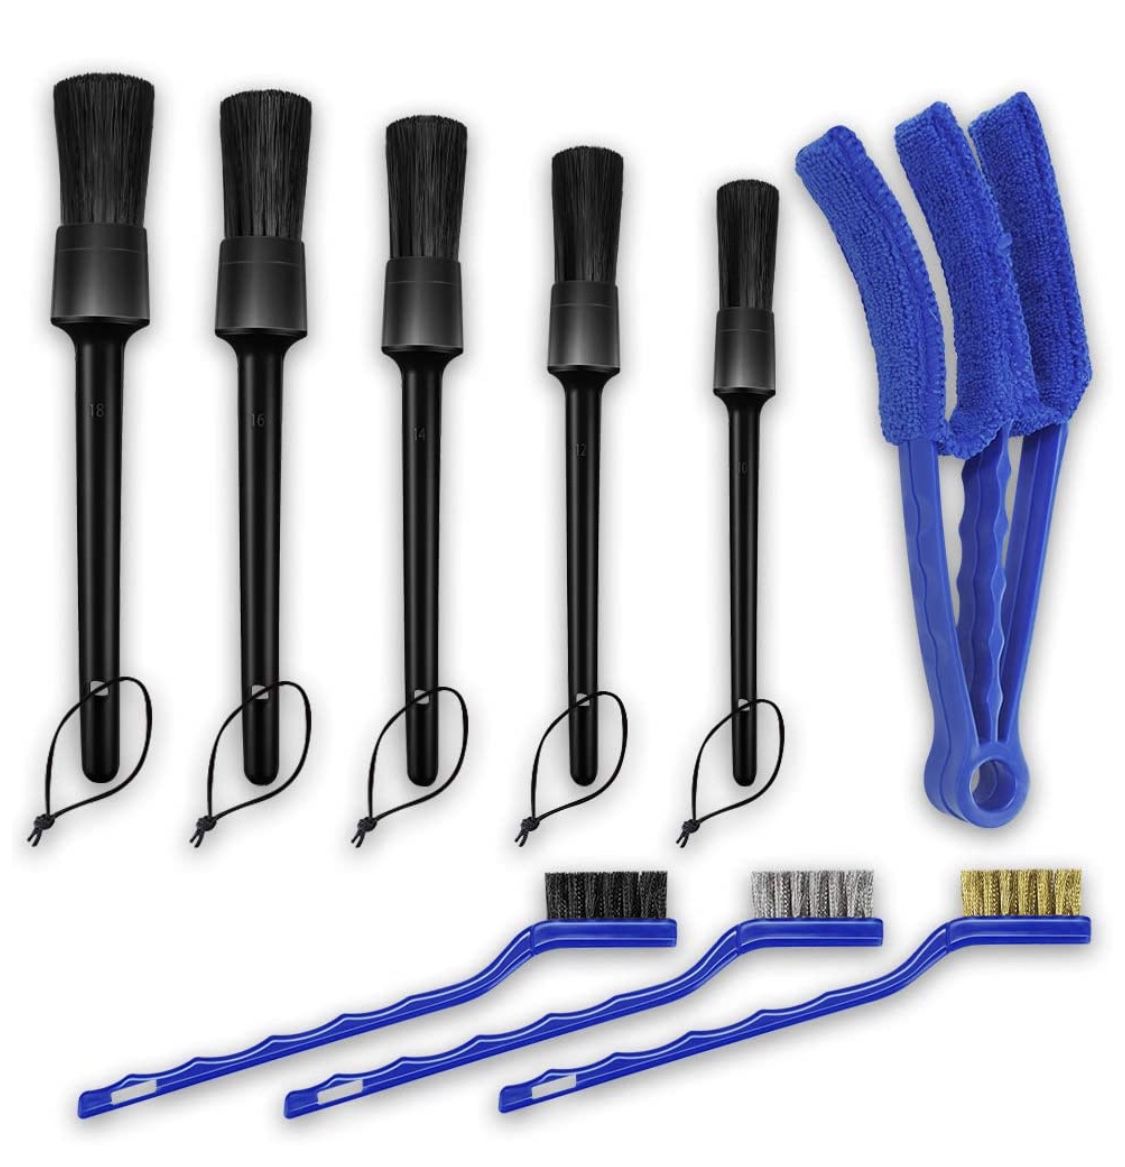 NEW! 9pcs Car Detailing Kit Auto Interior Cleaning Brush Set Includes Wire Brush Detail Boar Hair Brush Air Conditioner Brush for Cleaning Car Interio